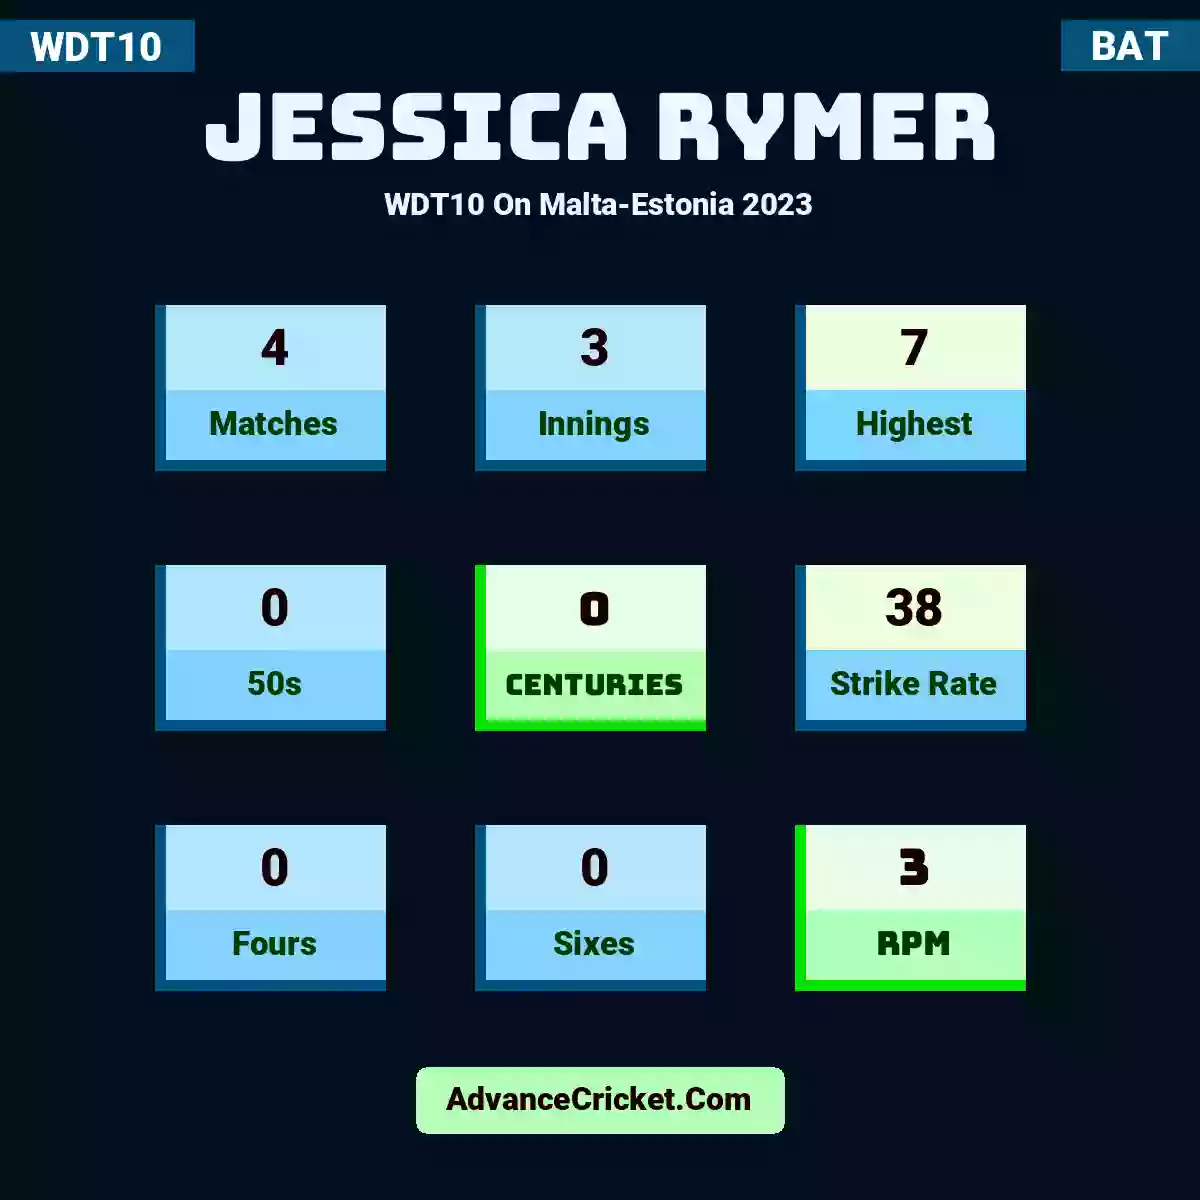 Jessica Rymer WDT10  On Malta-Estonia 2023, Jessica Rymer played 4 matches, scored 7 runs as highest, 0 half-centuries, and 0 centuries, with a strike rate of 38. J.Rymer hit 0 fours and 0 sixes, with an RPM of 3.